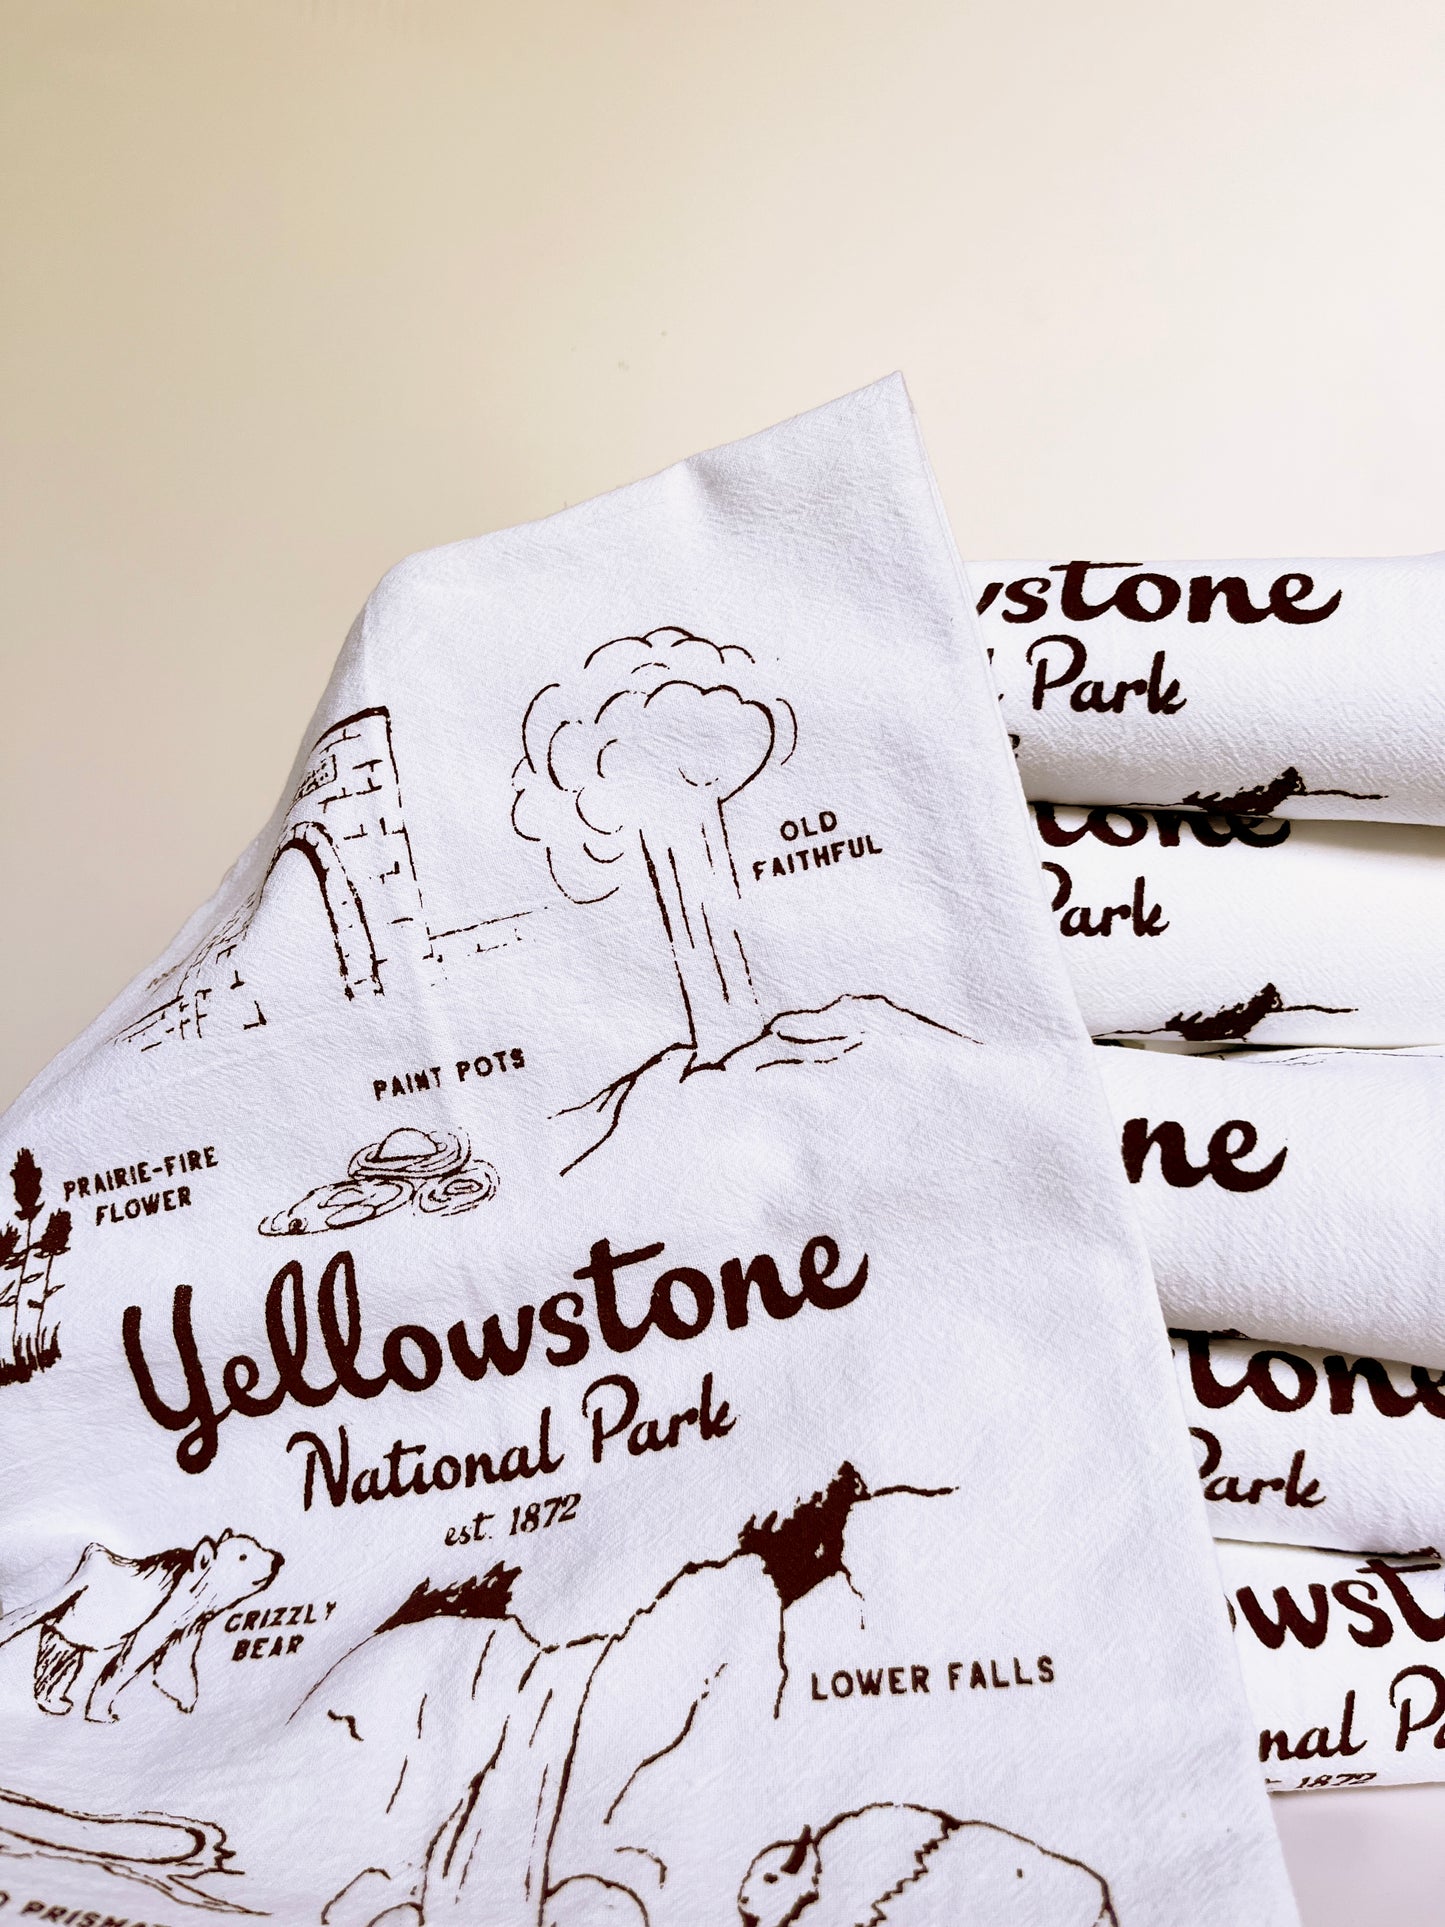 yellowstone national park tea towel brown screen print illustrations on white cotton kitchen towel coin laundry montana 